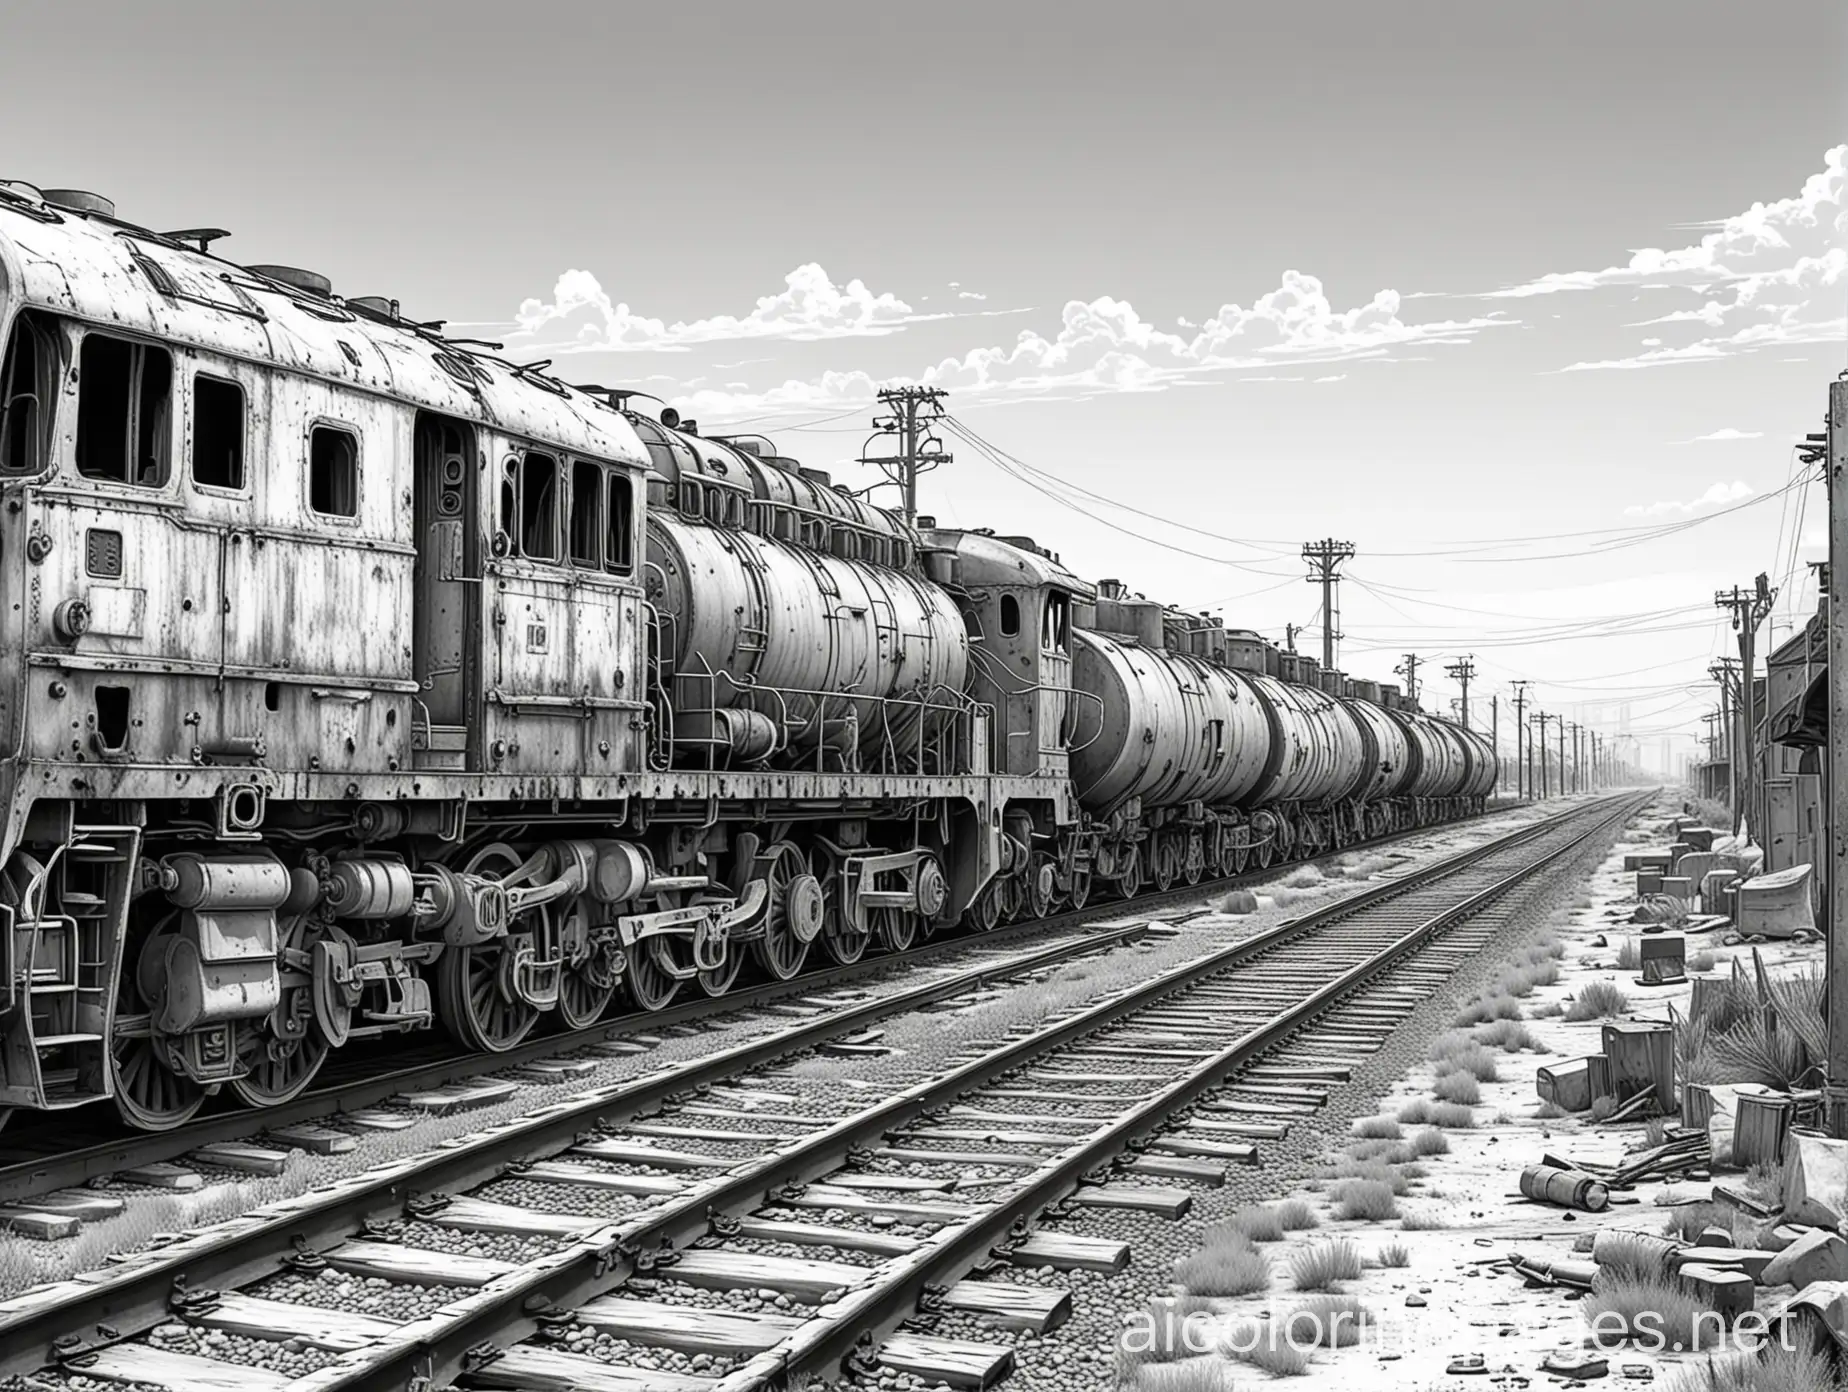 post apocalyptic train yard, Coloring Page, black and white, line art, white background, Simplicity, Ample White Space. The background of the coloring page is plain white to make it easy for young children to color within the lines. The outlines of all the subjects are easy to distinguish, making it simple for kids to color without too much difficulty